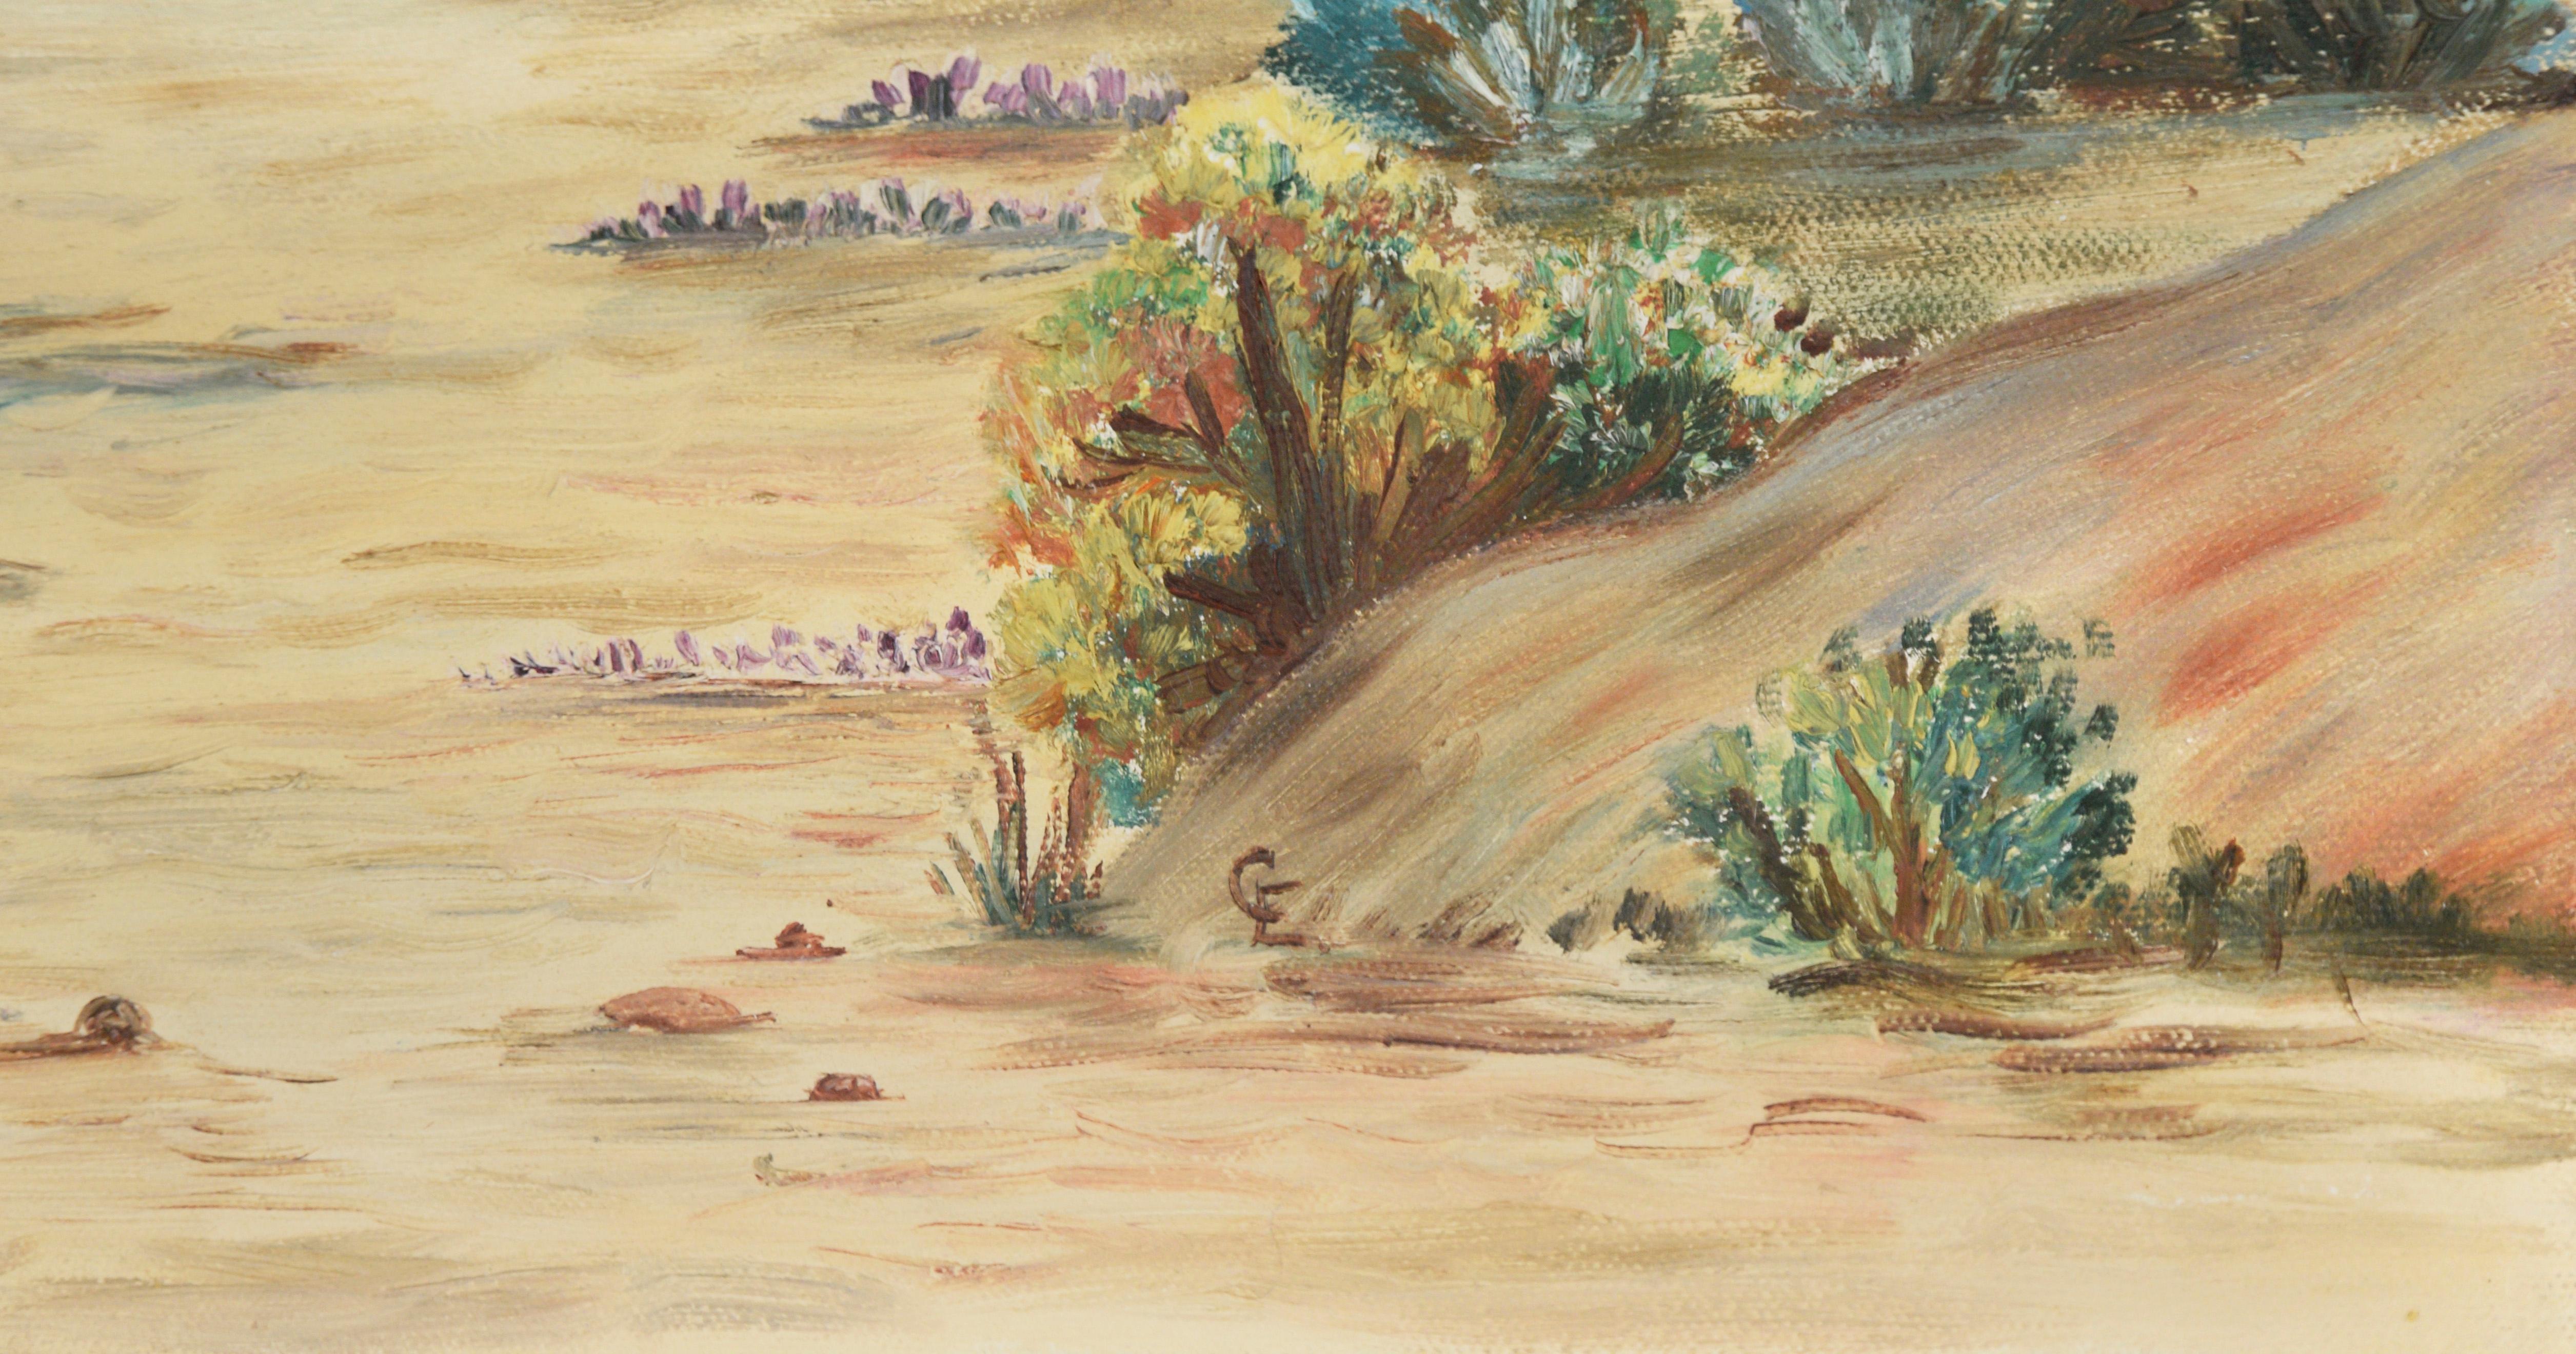 Desert Landscape with Agave and Yucca - Oil on Canvas For Sale 1